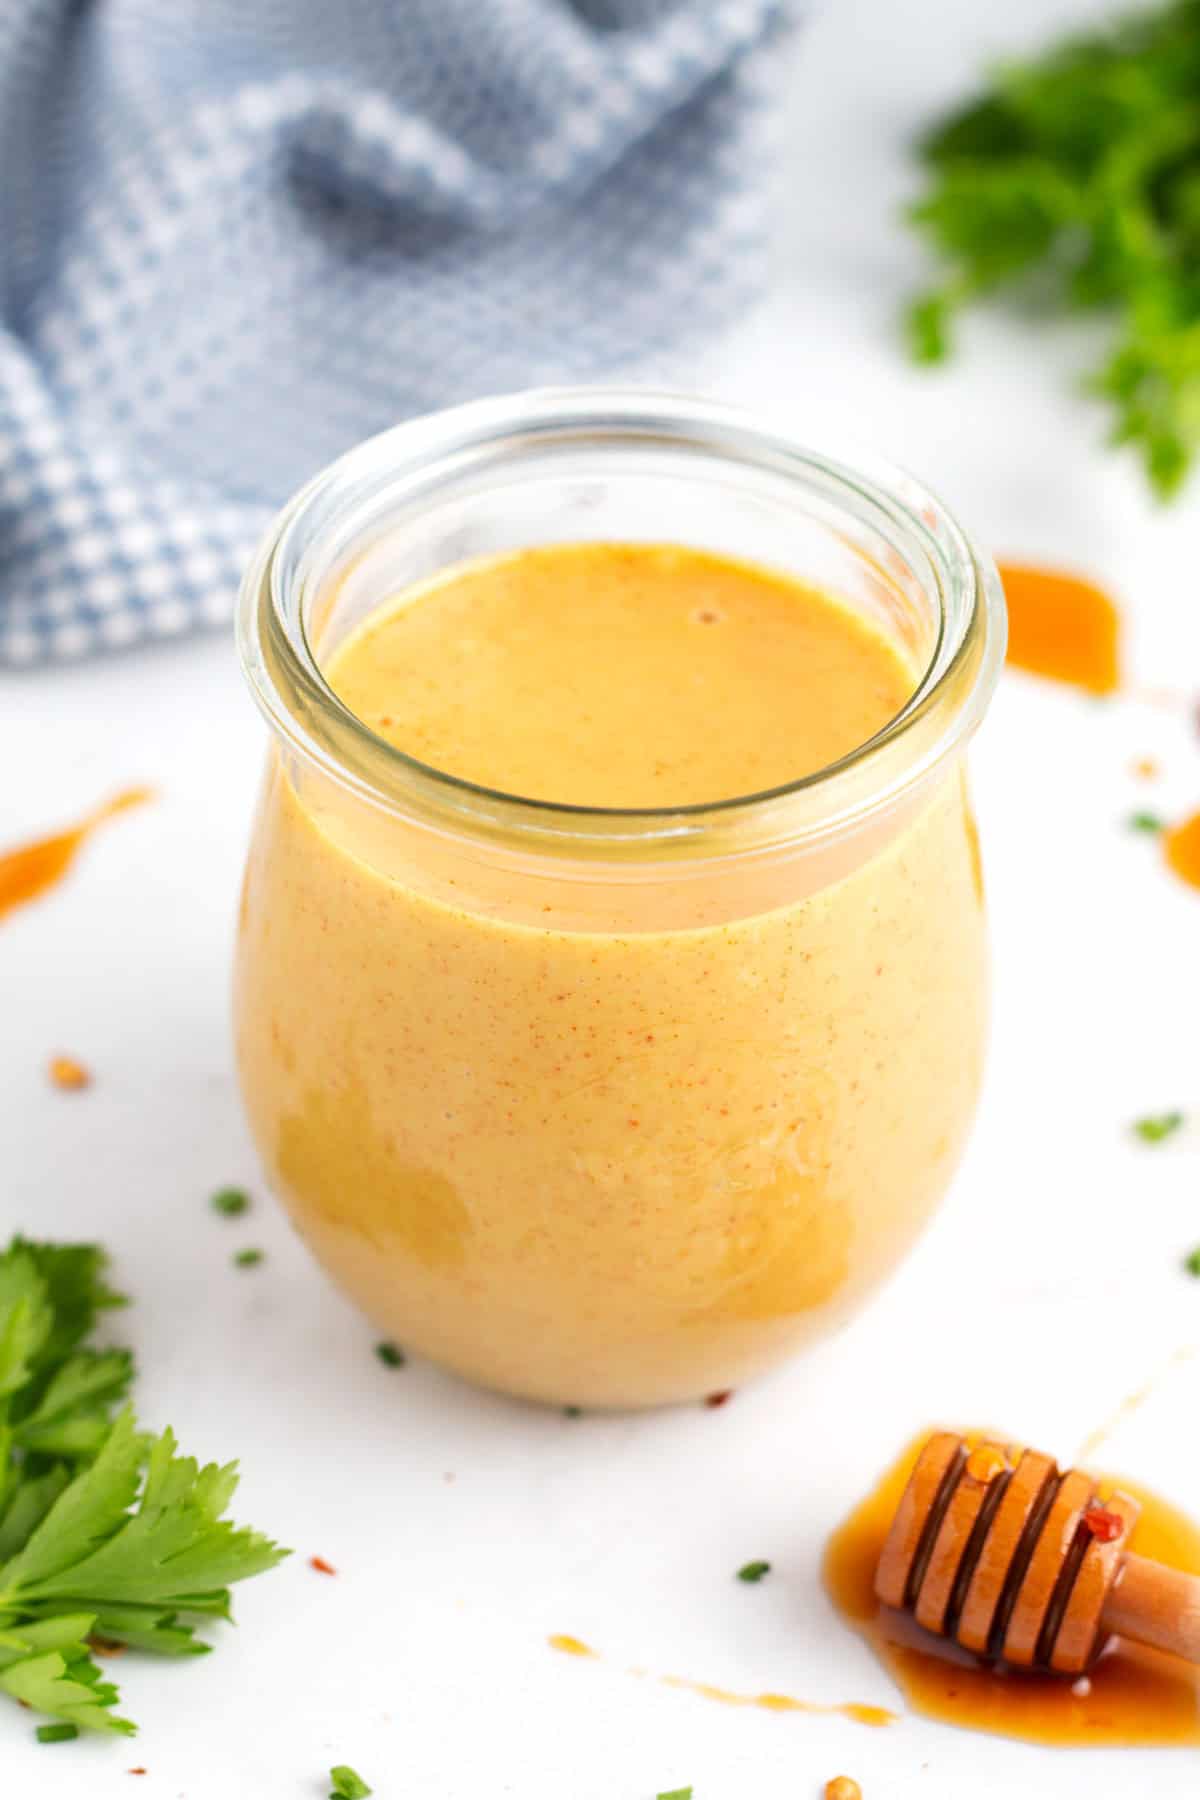 A glass jar of mustard sauce with parsley and a honey stick in front of the jar, a blue towel behind the jar, and drips of honey on the counter.